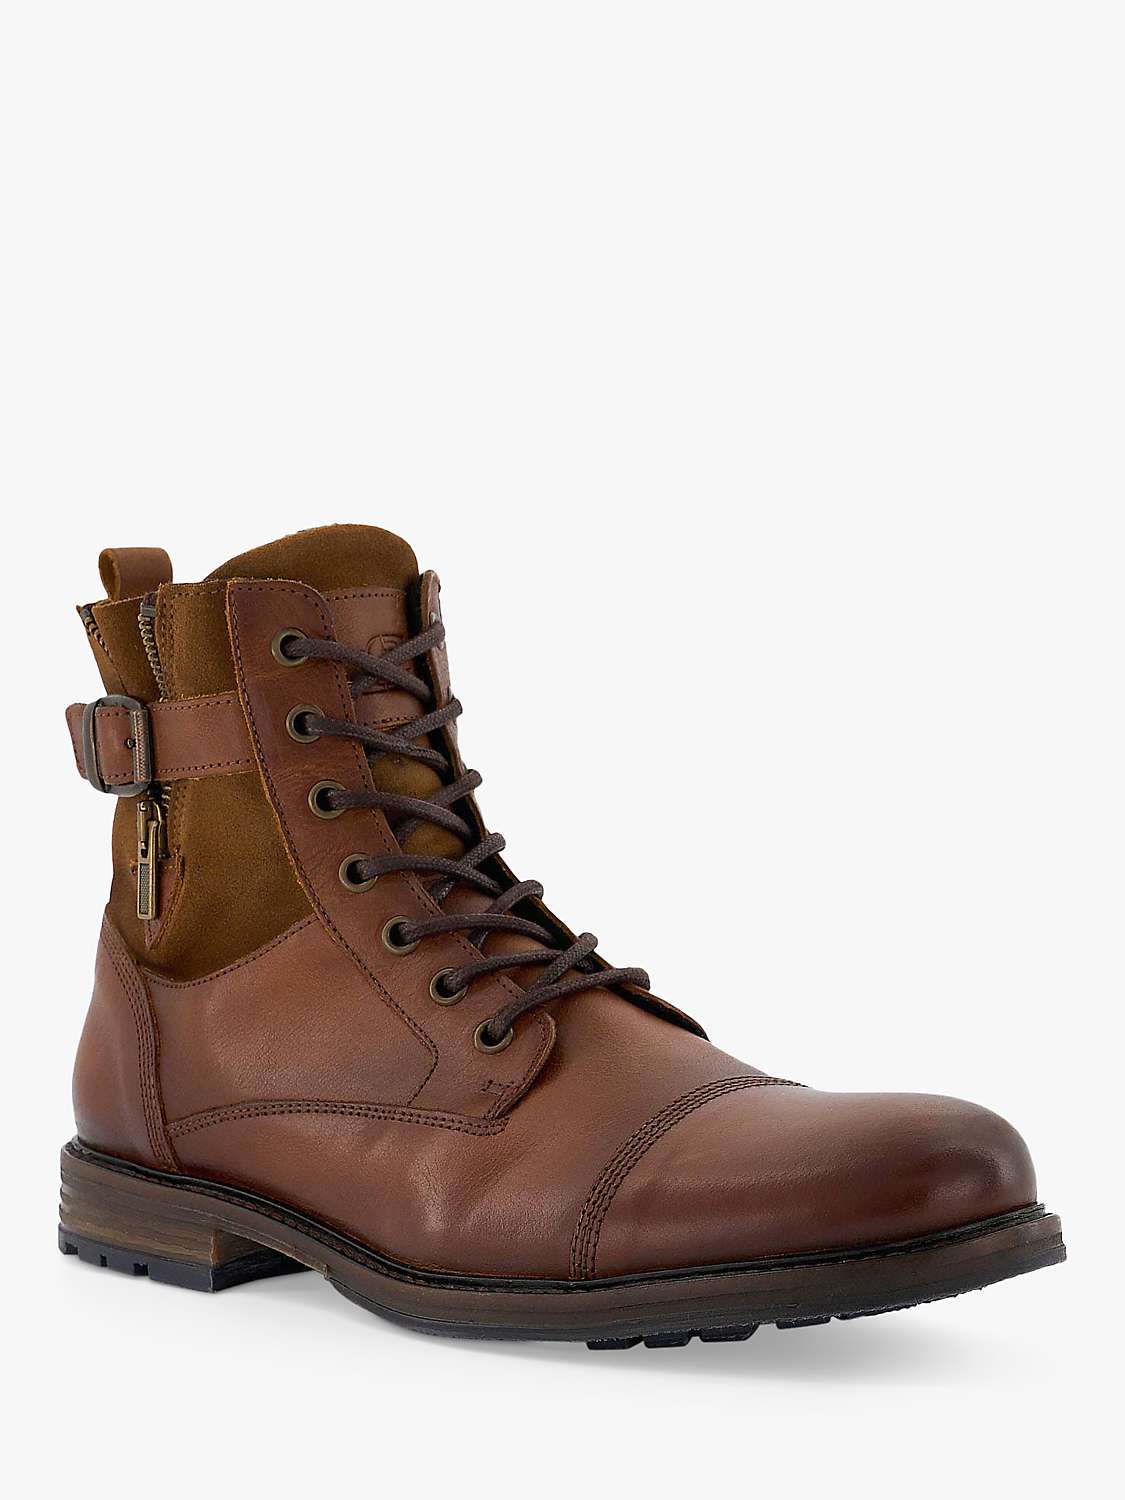 Buy Dune Call Leather Ankle Boots, Tan Online at johnlewis.com